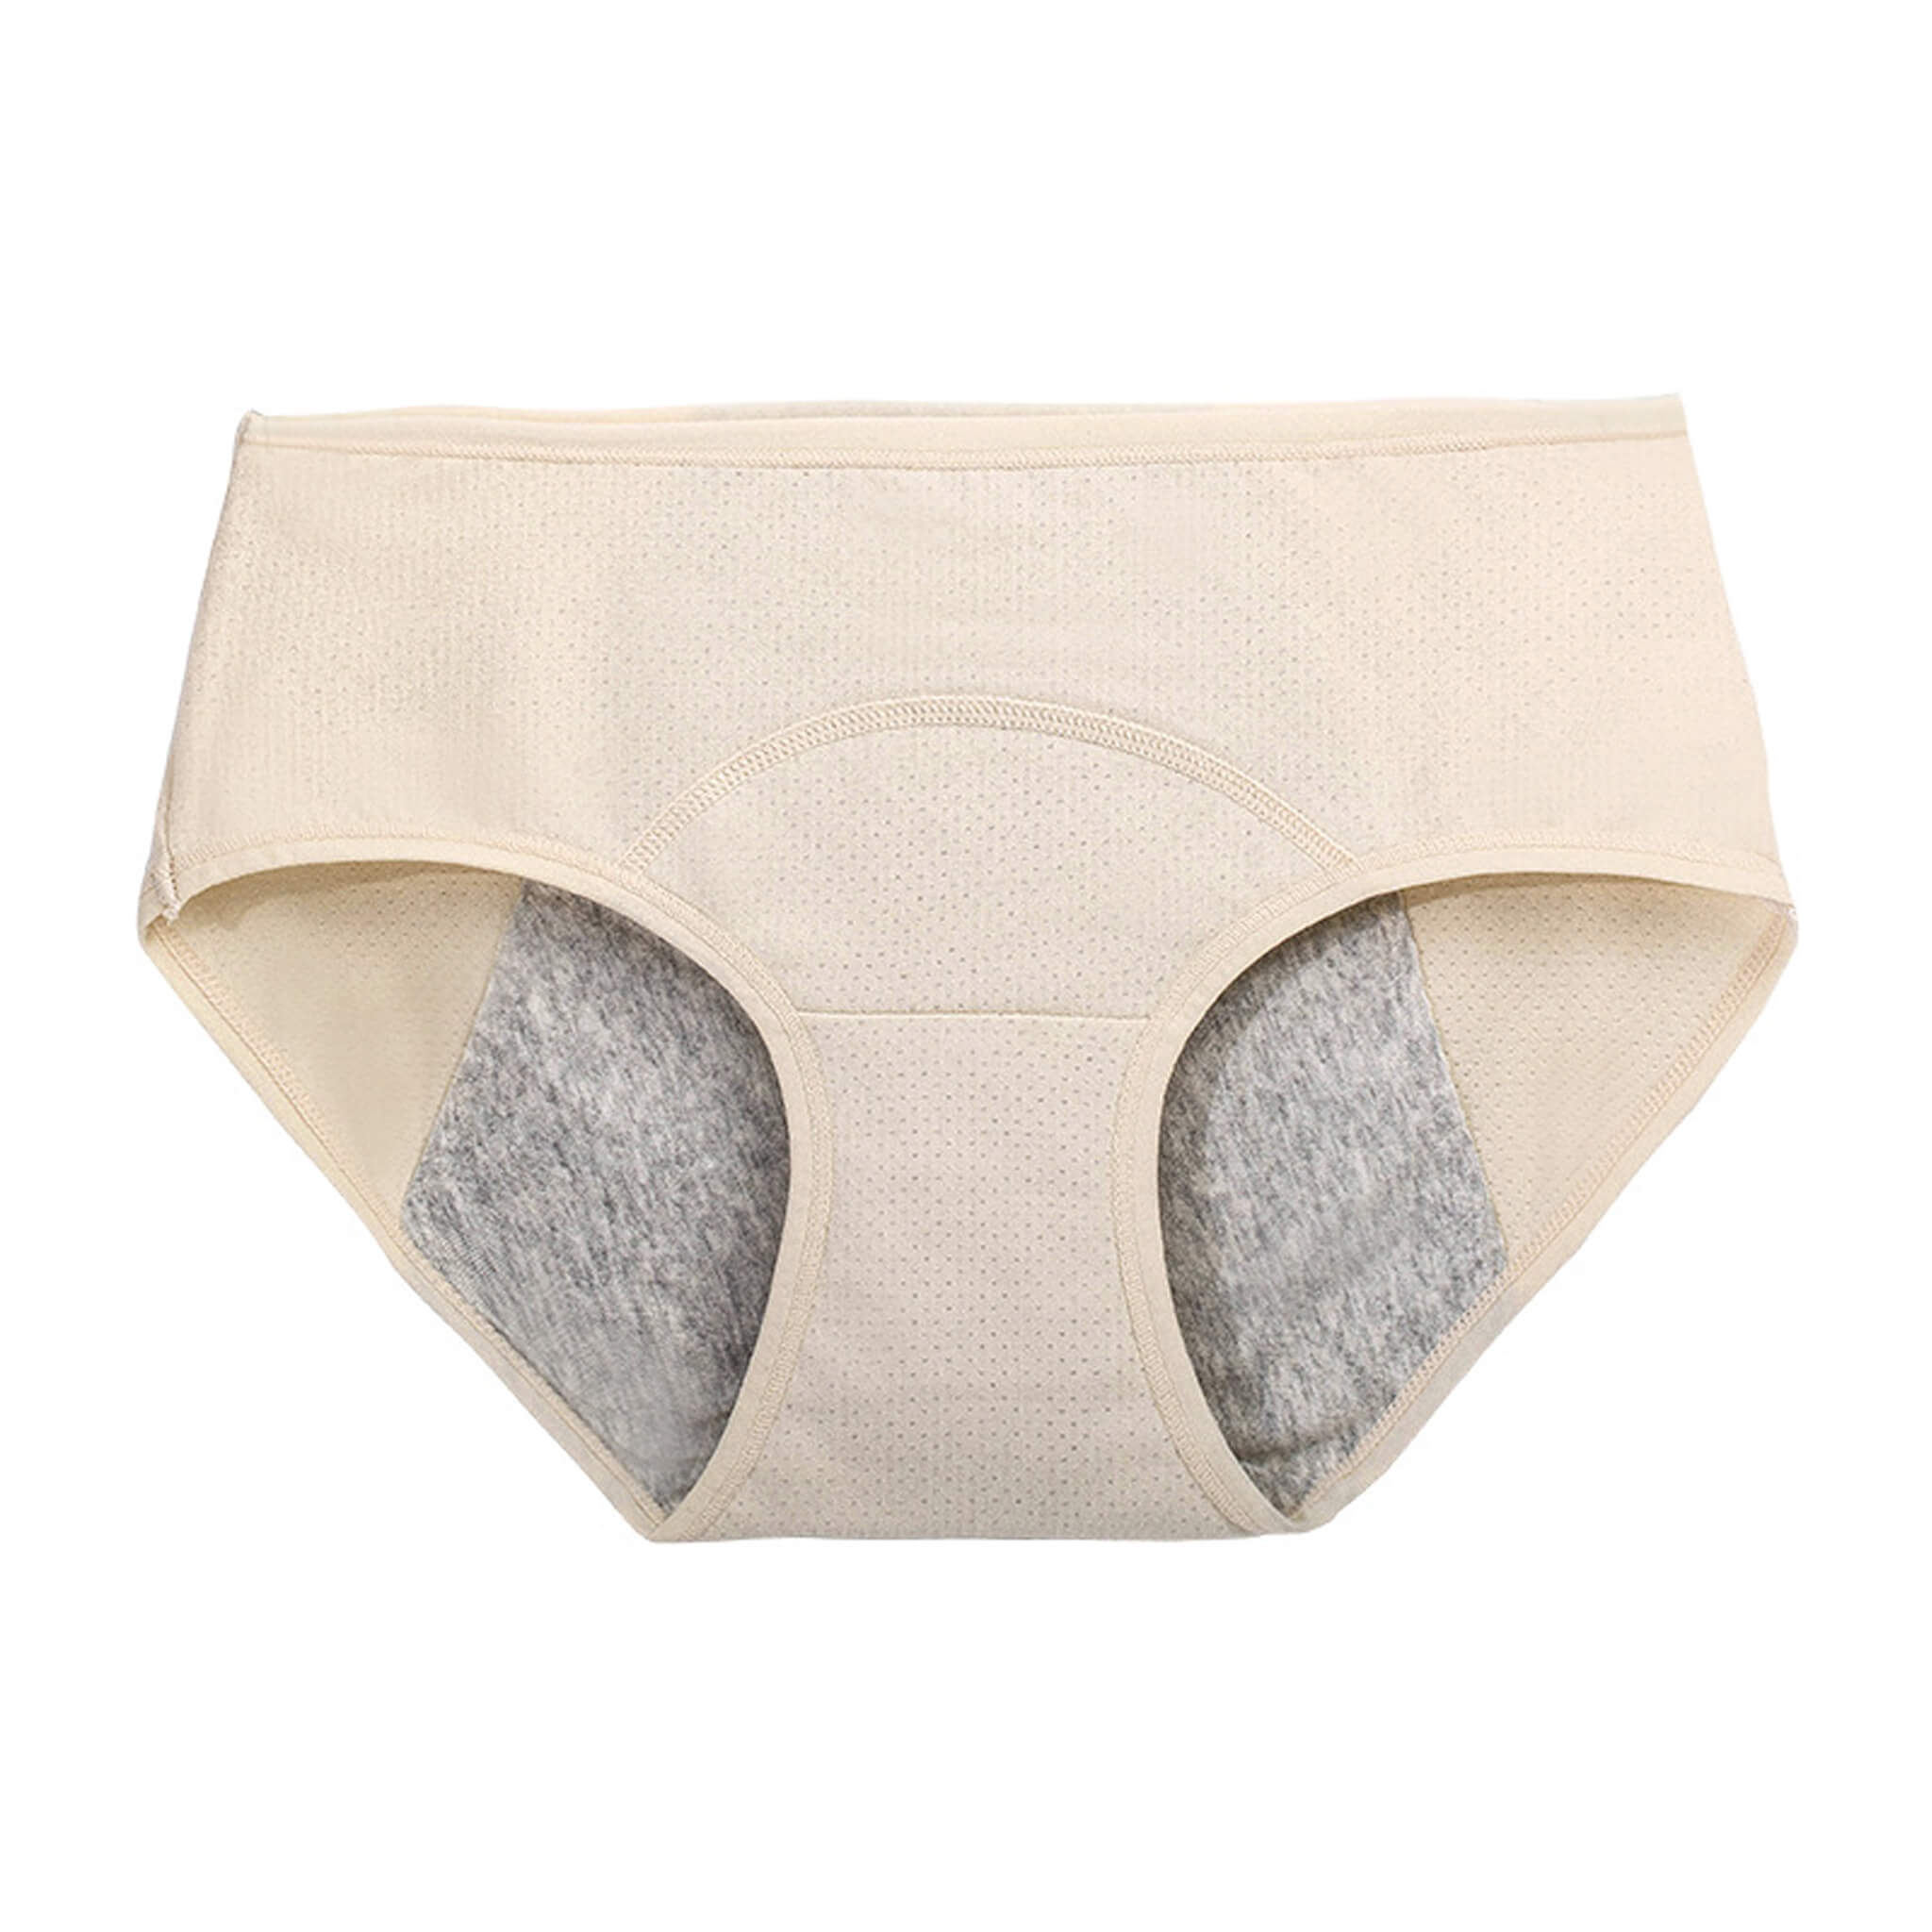 3-piece Cotton Leakproof Period Panty - LUCKYPADS